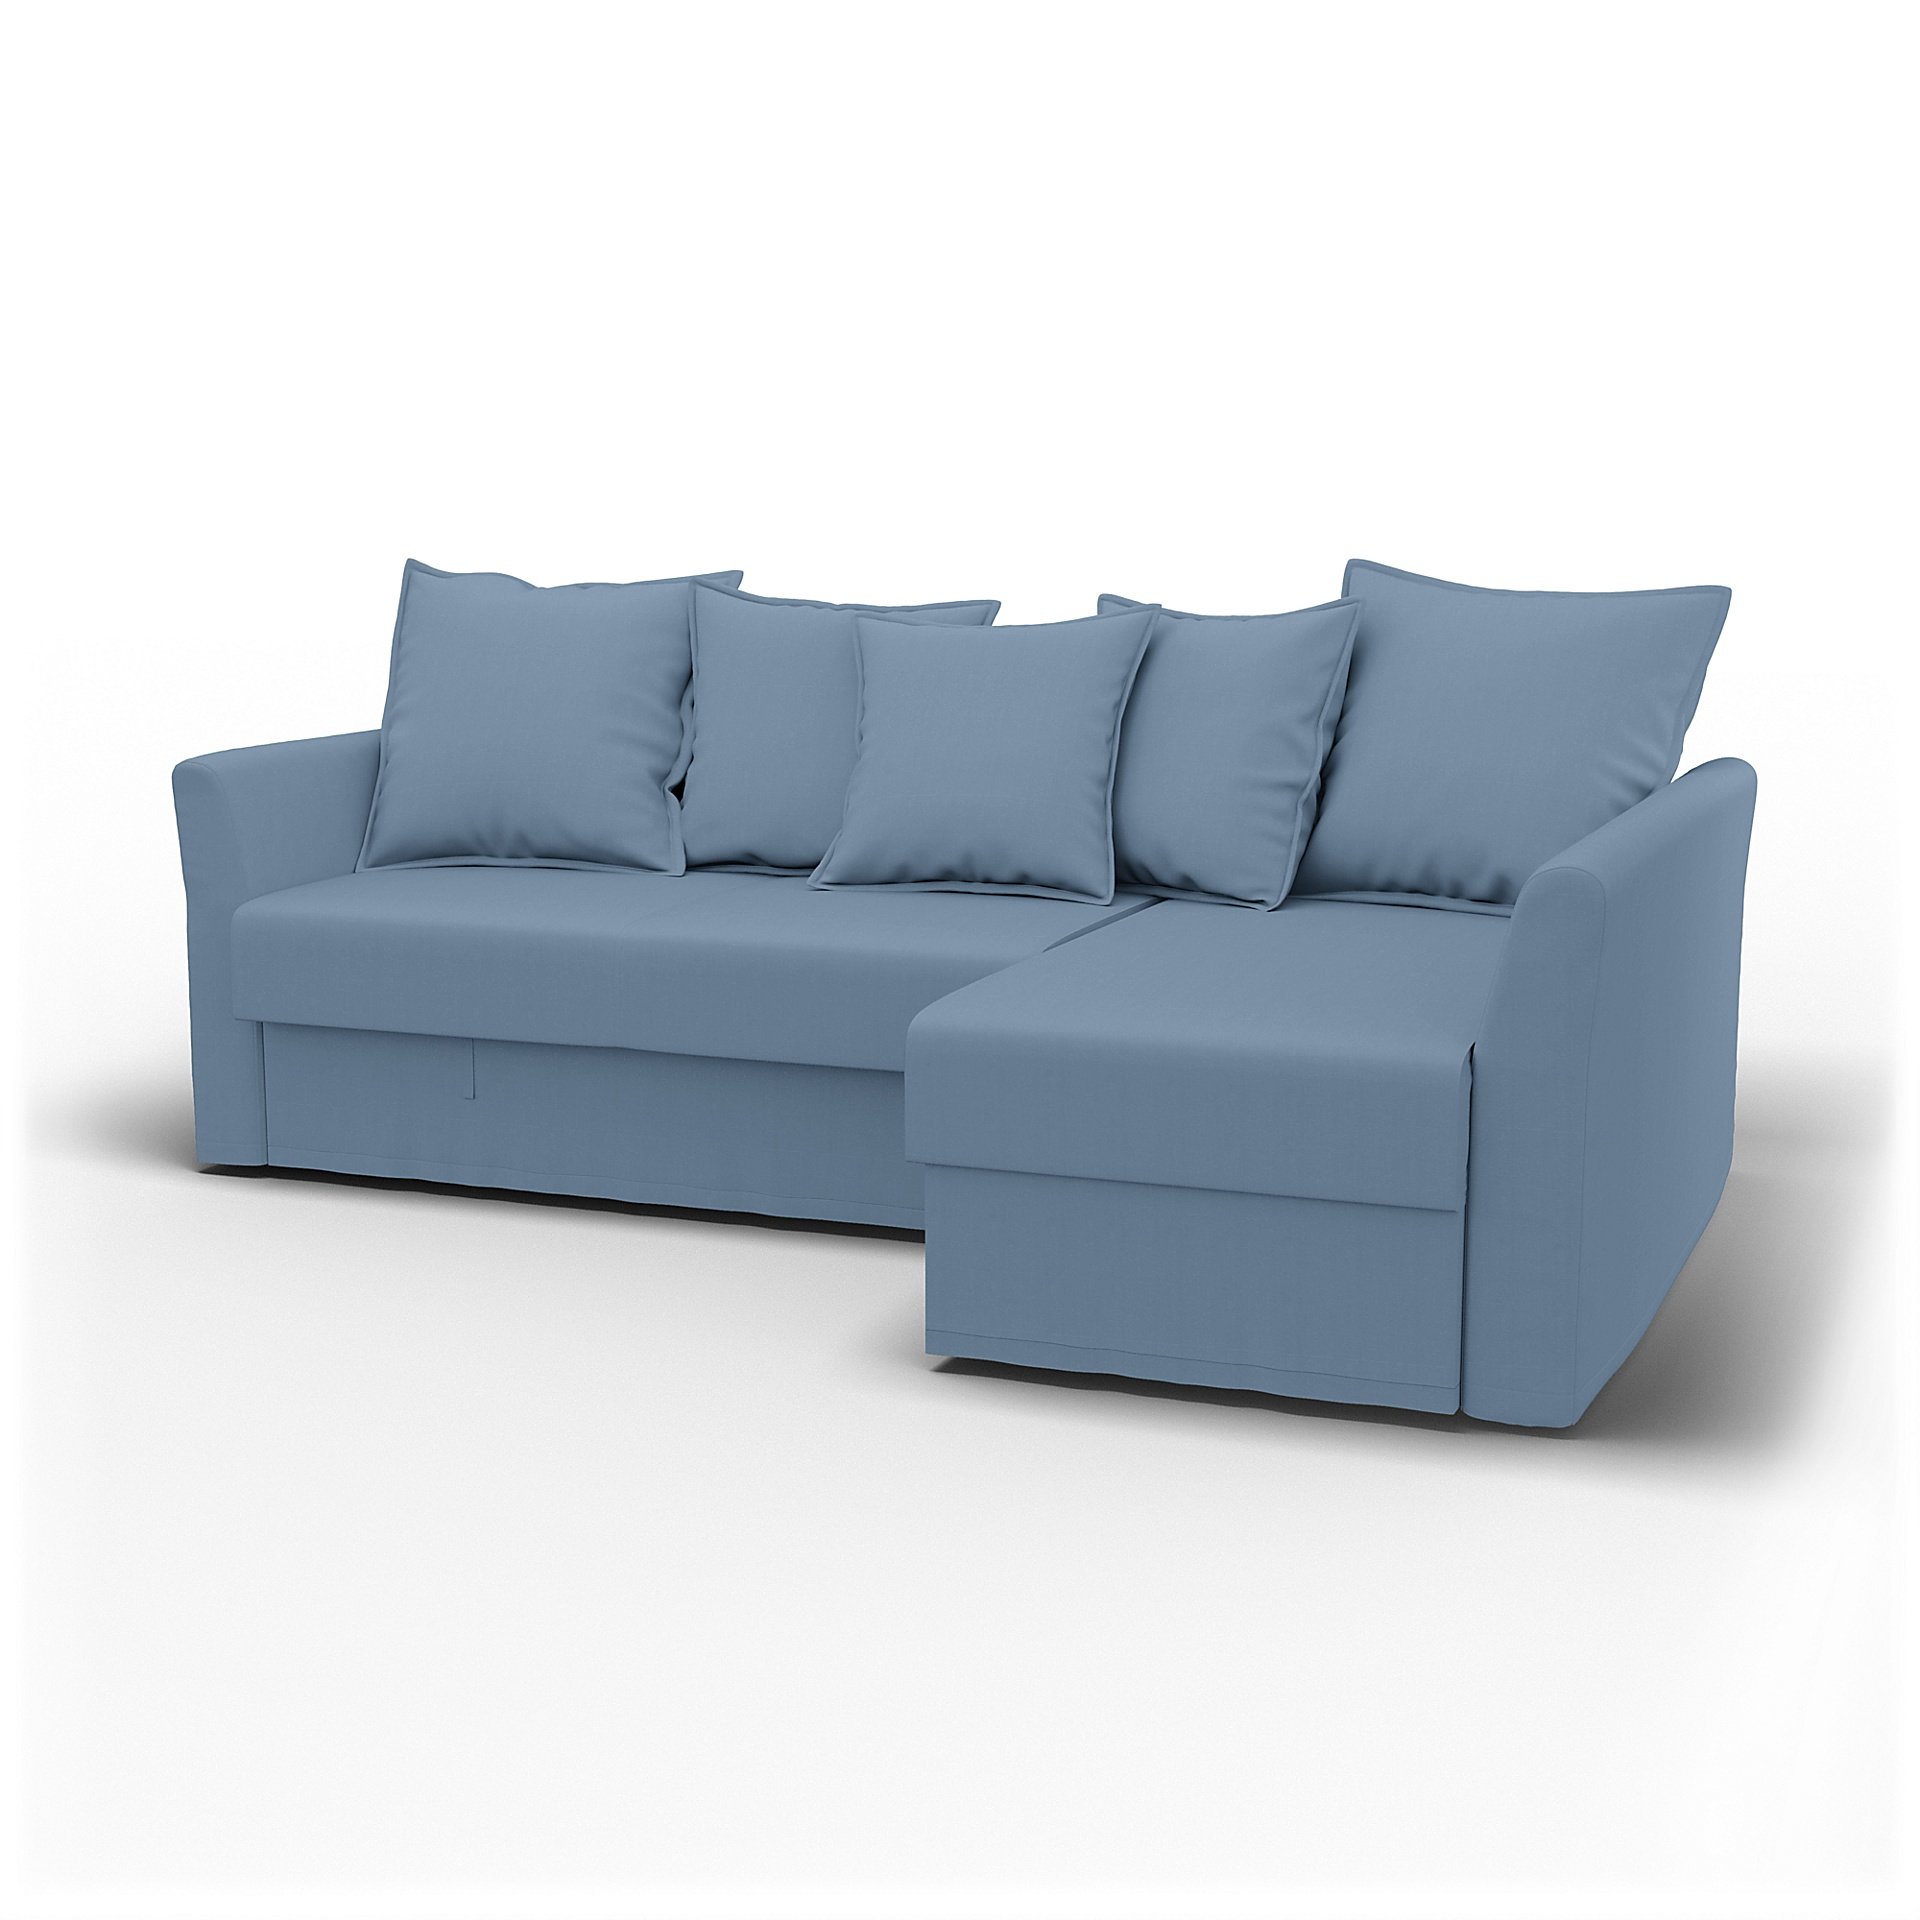 IKEA - Holmsund Sofabed with Chaiselongue, Dusty Blue, Cotton - Bemz